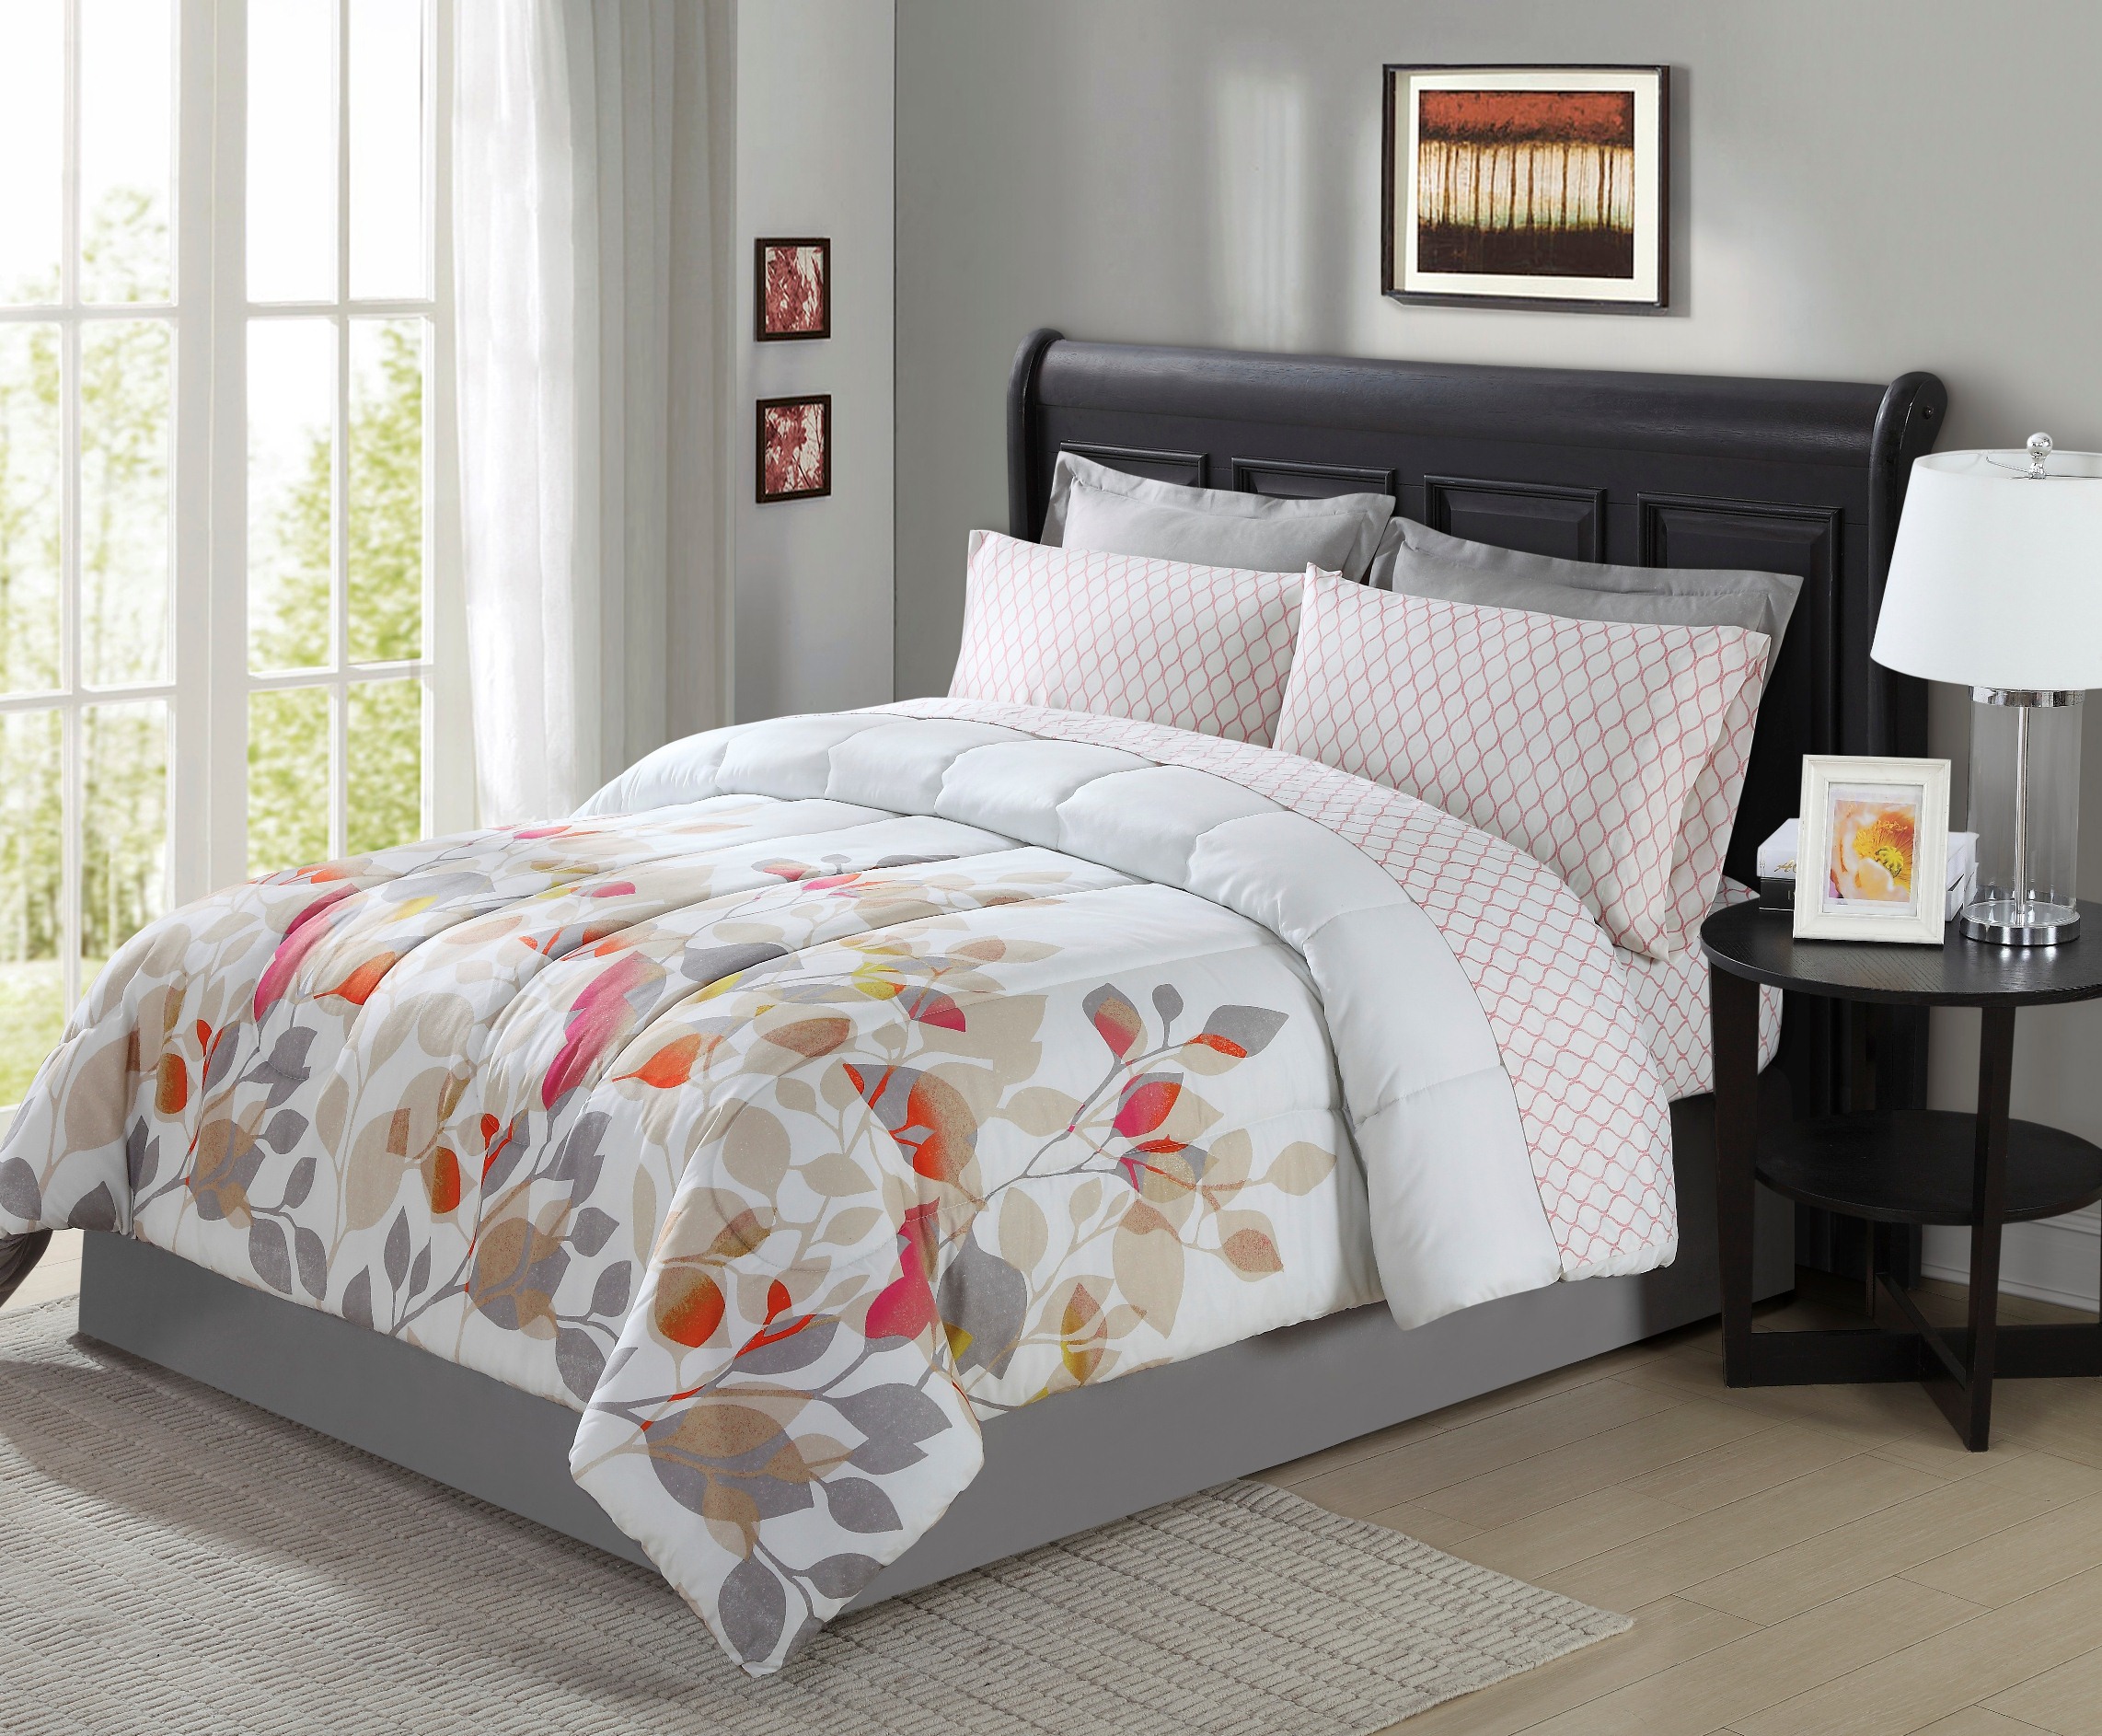 Colormate Complete Bed Set - Bree